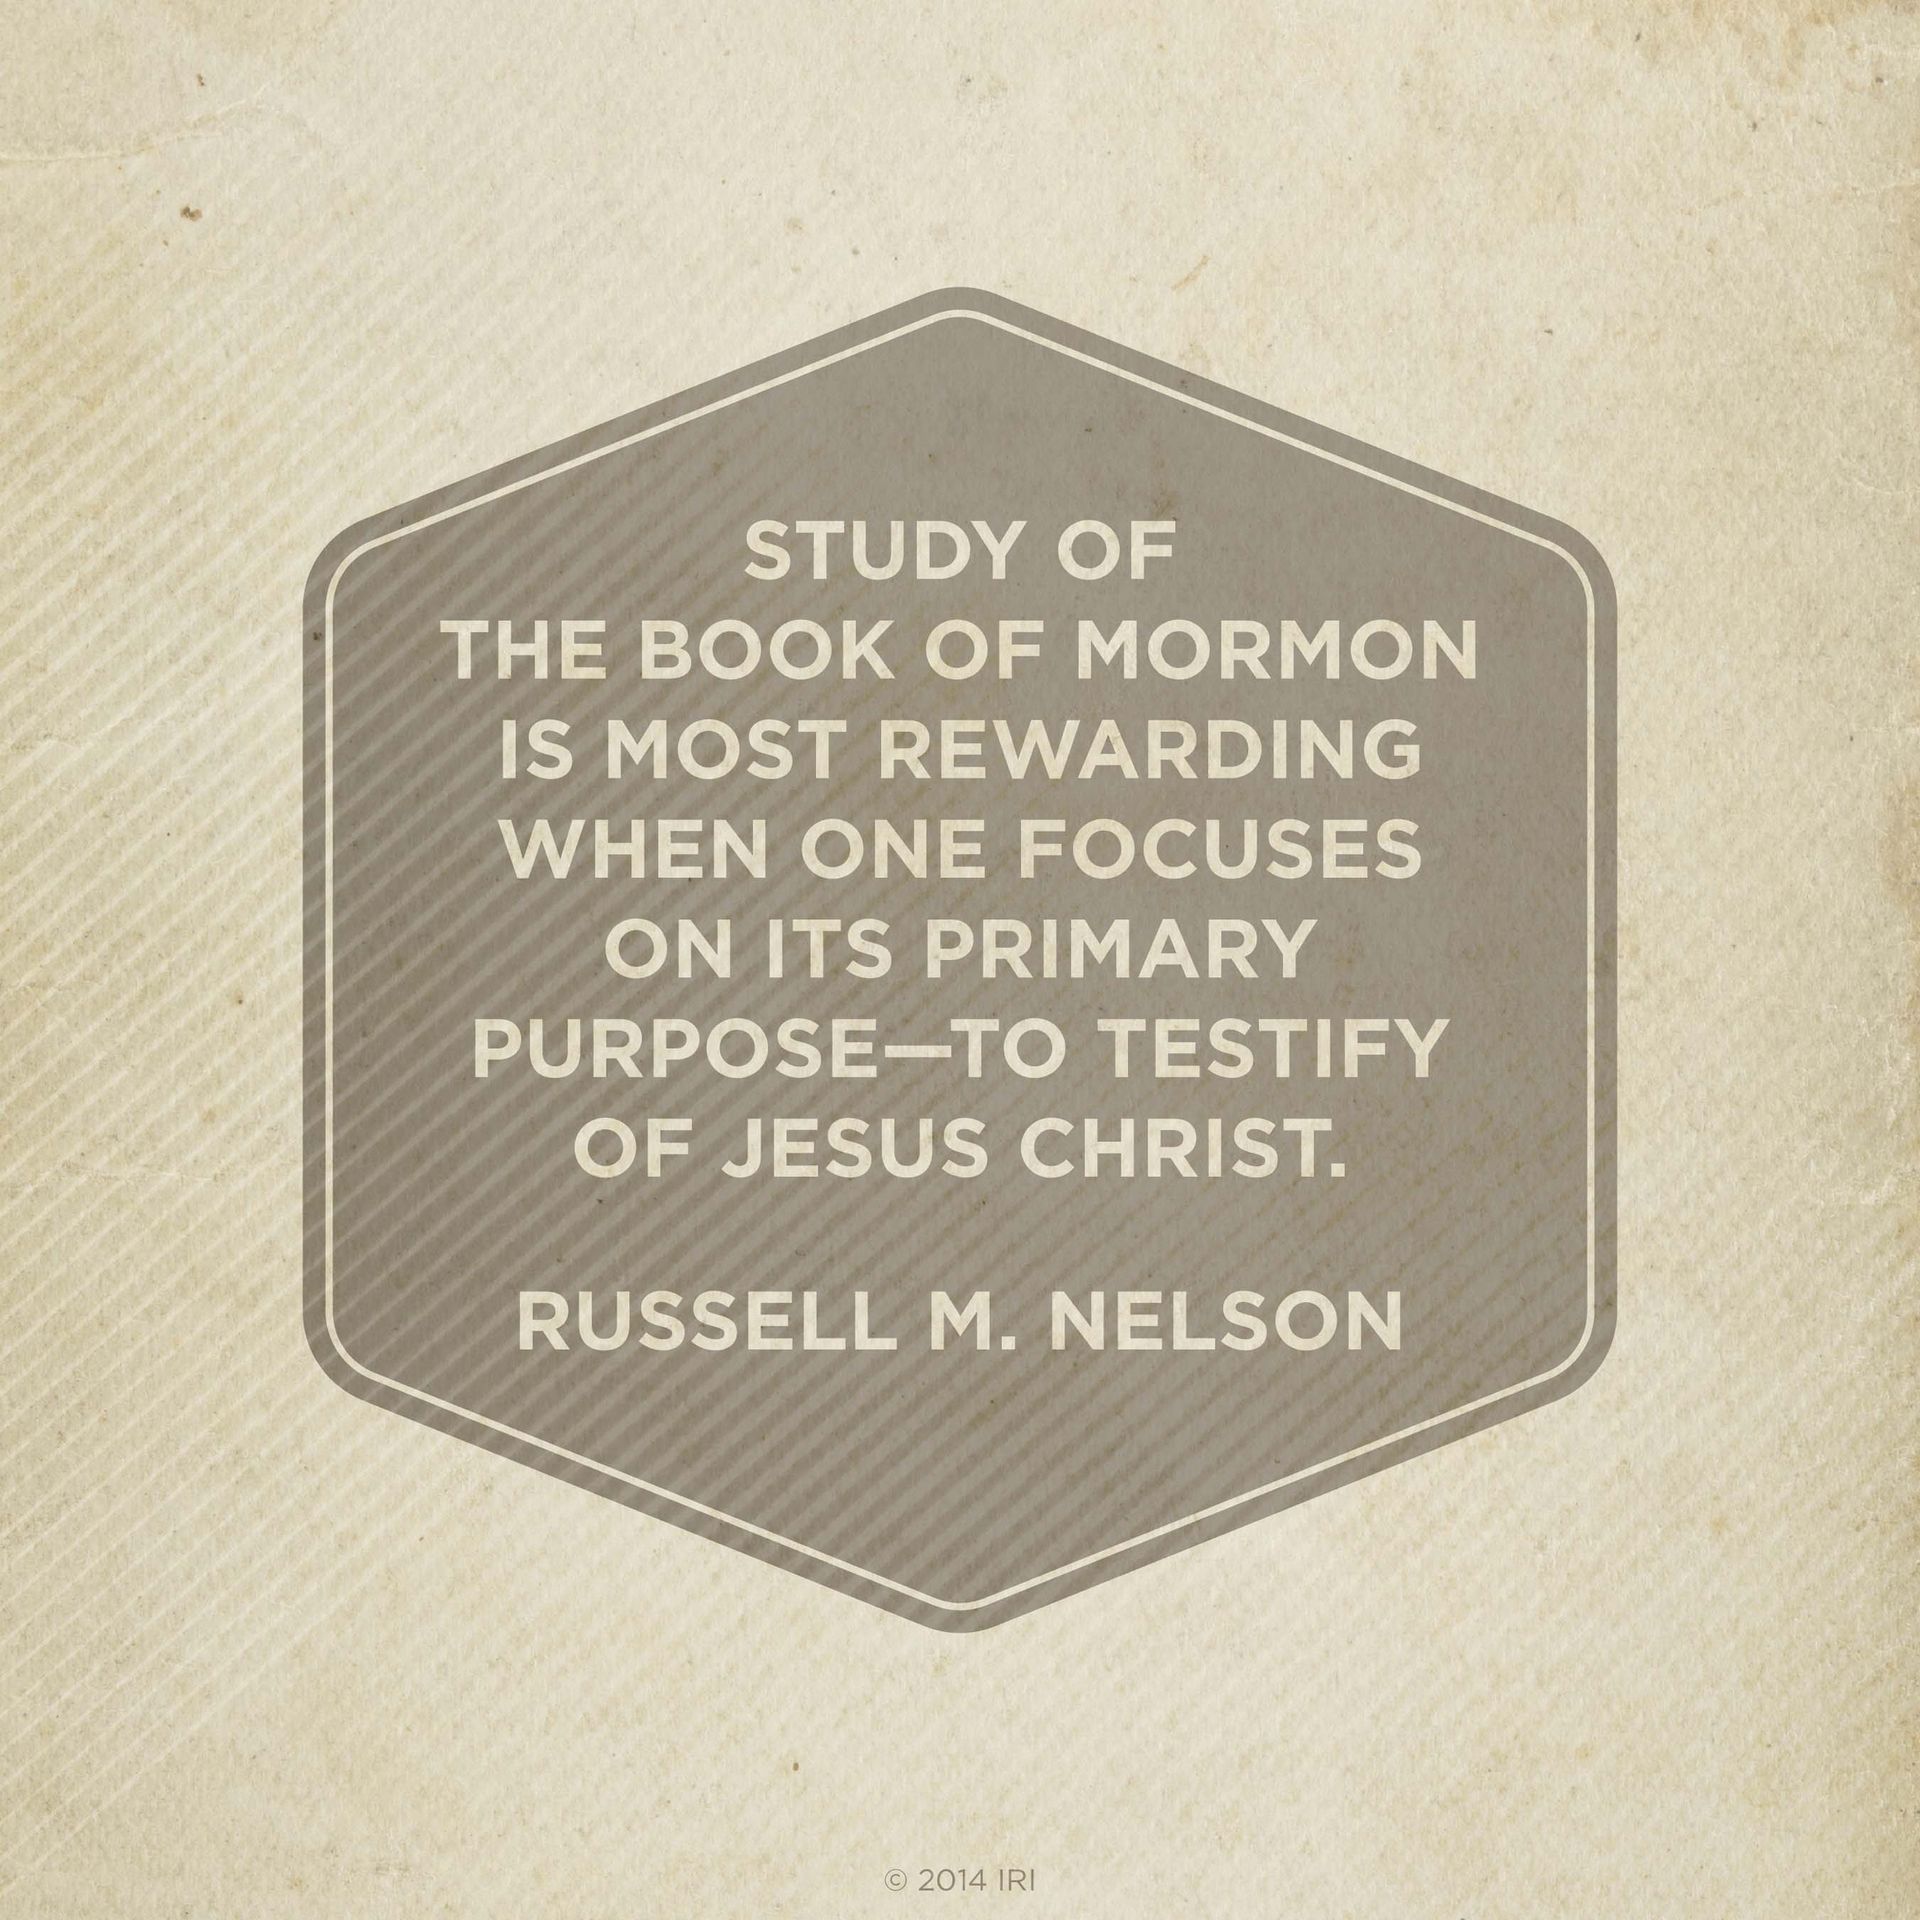 “Study of the Book of Mormon is most rewarding when one focuses on its primary purpose—to testify of Jesus Christ.”—President Russell M. Nelson, “A Testimony of the Book of Mormon”